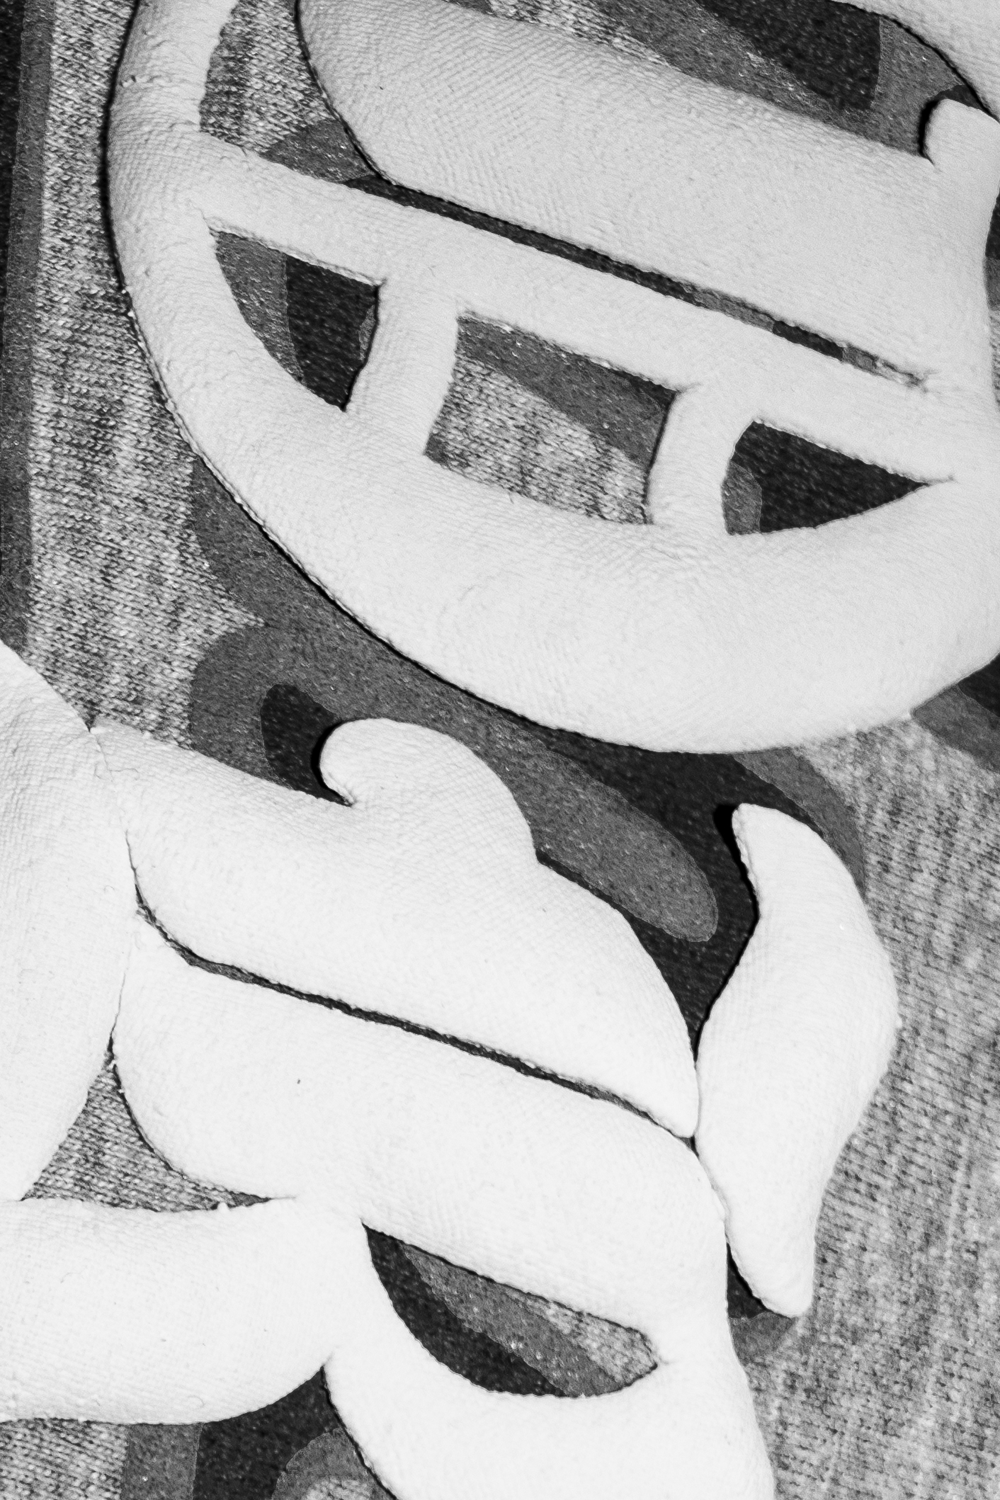 Black and white close up macro image of textile with lettering.